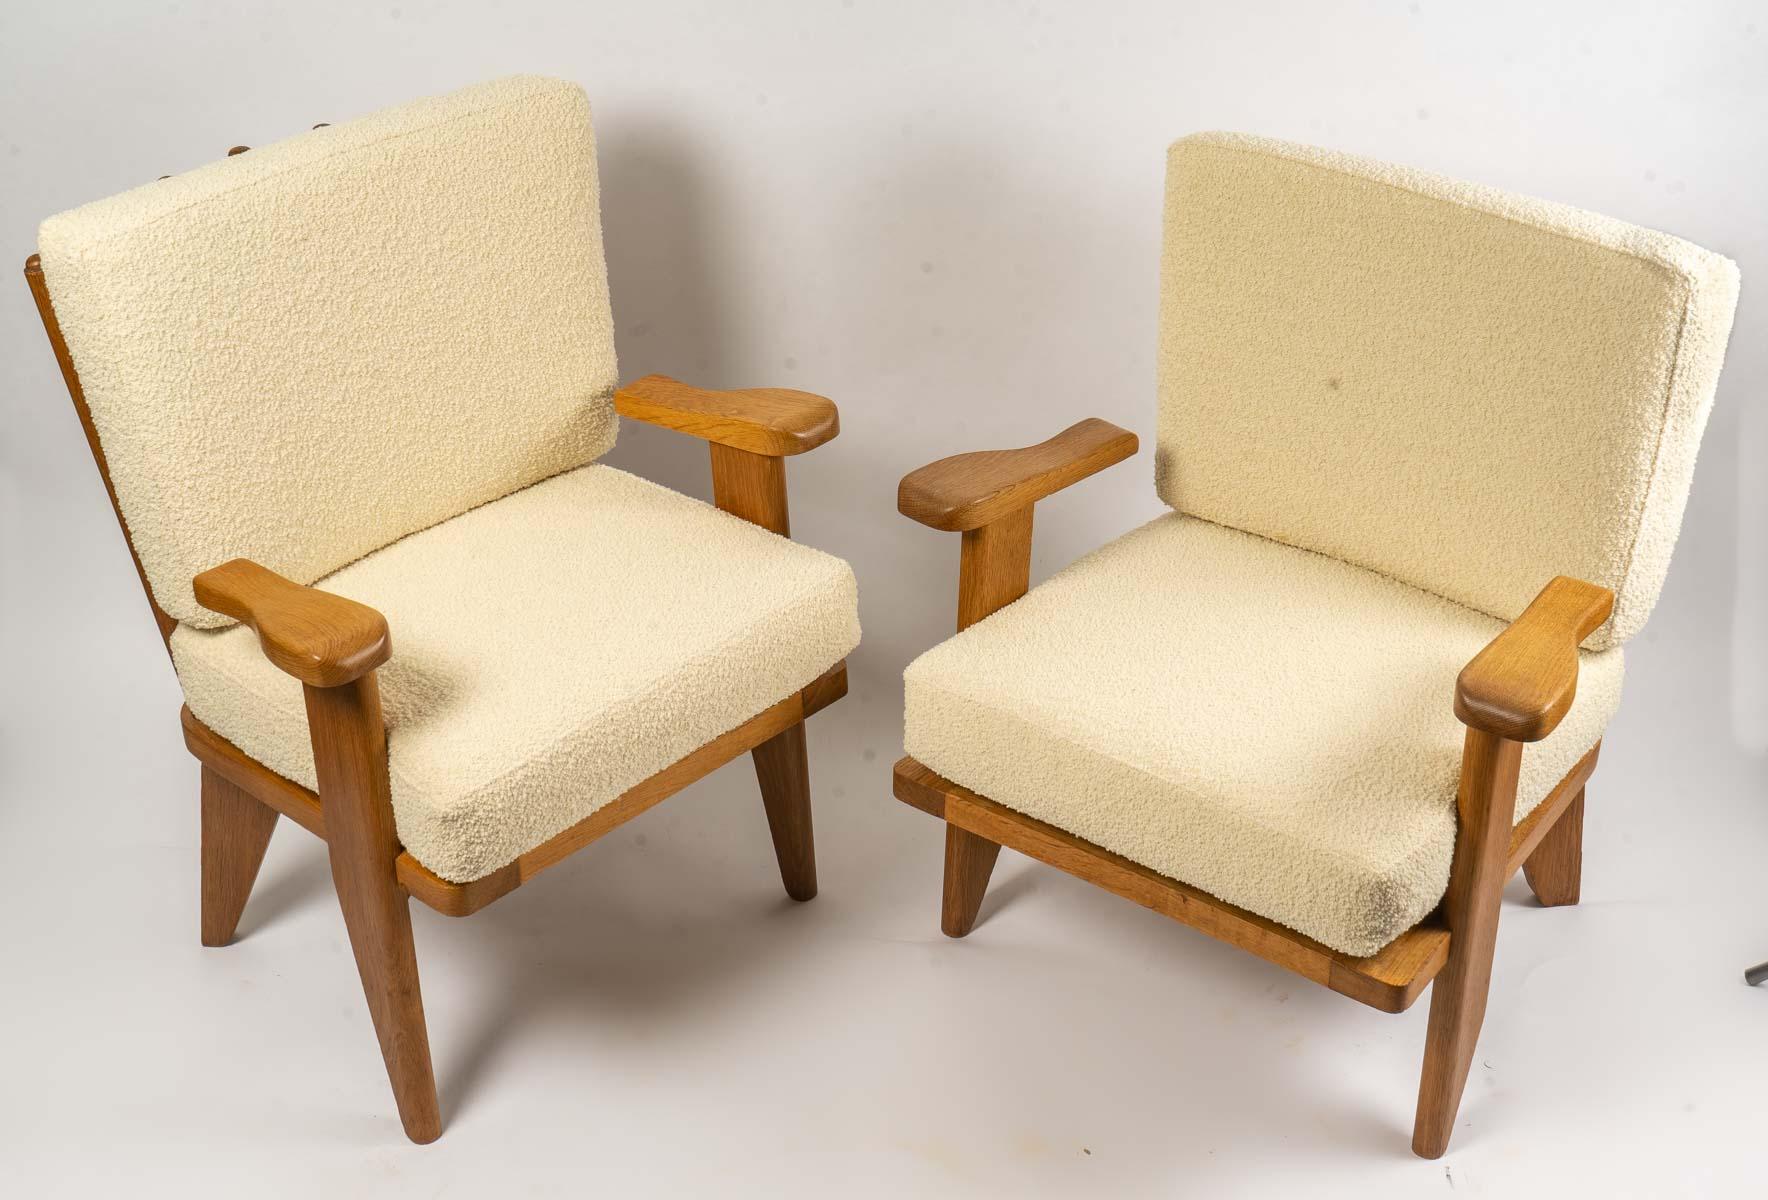 Pair of armchairs Guillerme and Chambron
Pair of armchairs in light oak. The upholstery is in white buckle redone to new. Work from the 60's. Excellent condition. 
Measures: H: 85 cm, W: 69 cm, D: 57 cm
H: 77 cm, W: 73 cm, D: 63 cm.